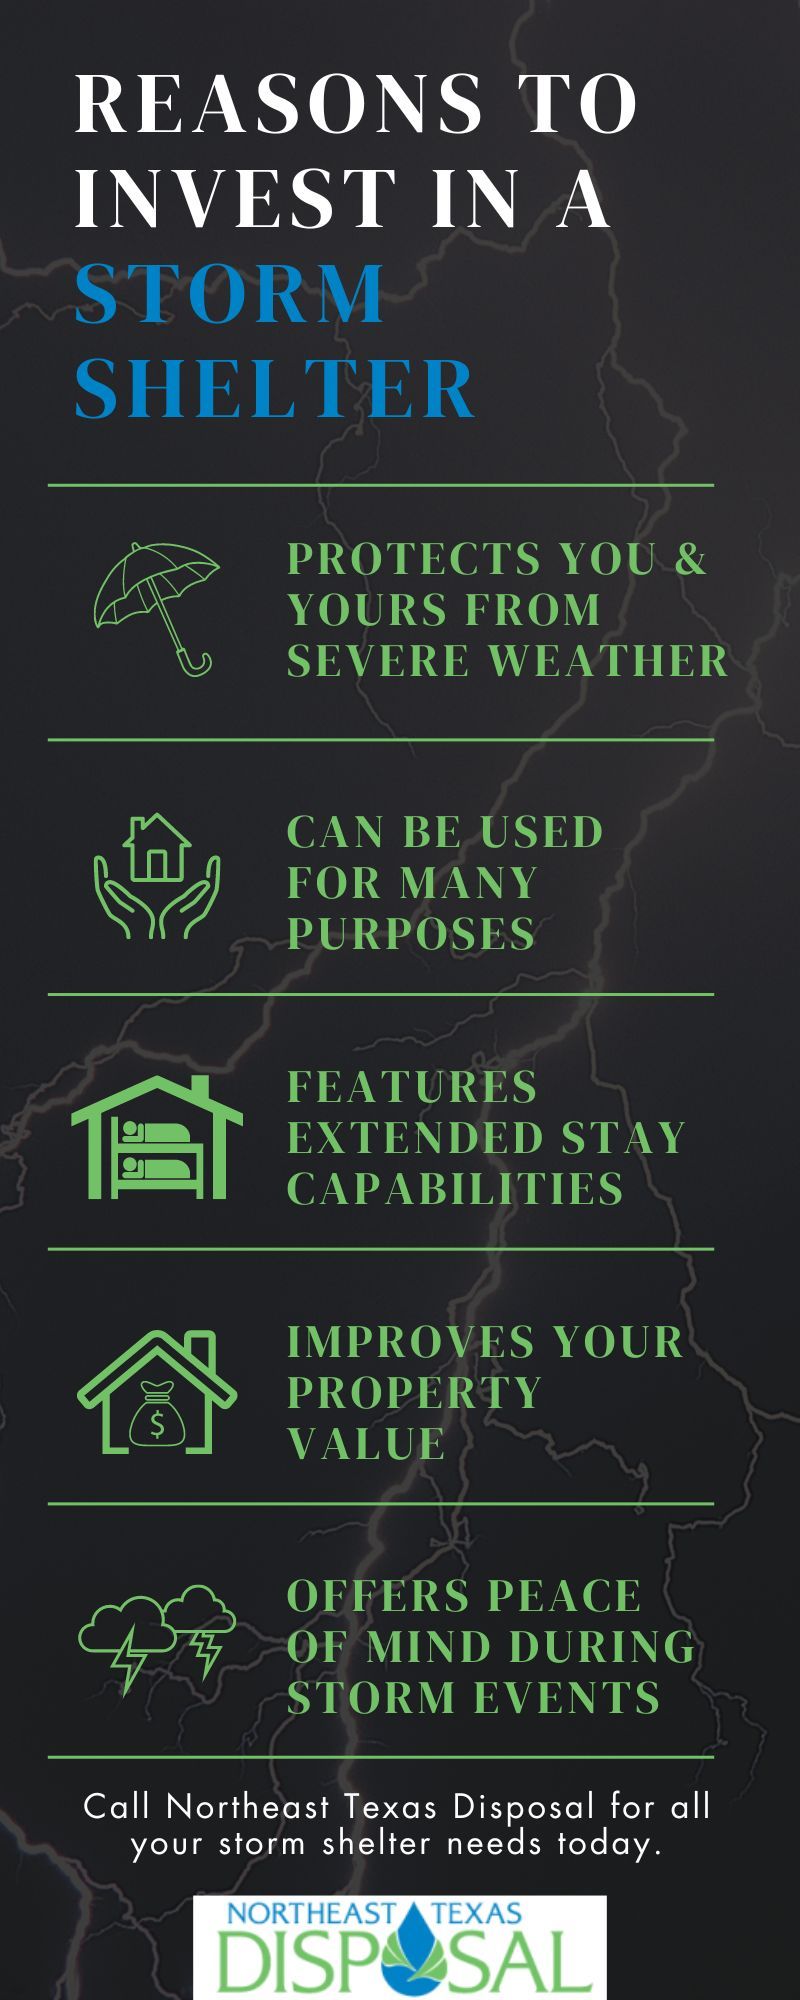 M38733 - Northeast Texas Disposal Infographic Reasons to Invest in a Storm Shelter.jpg